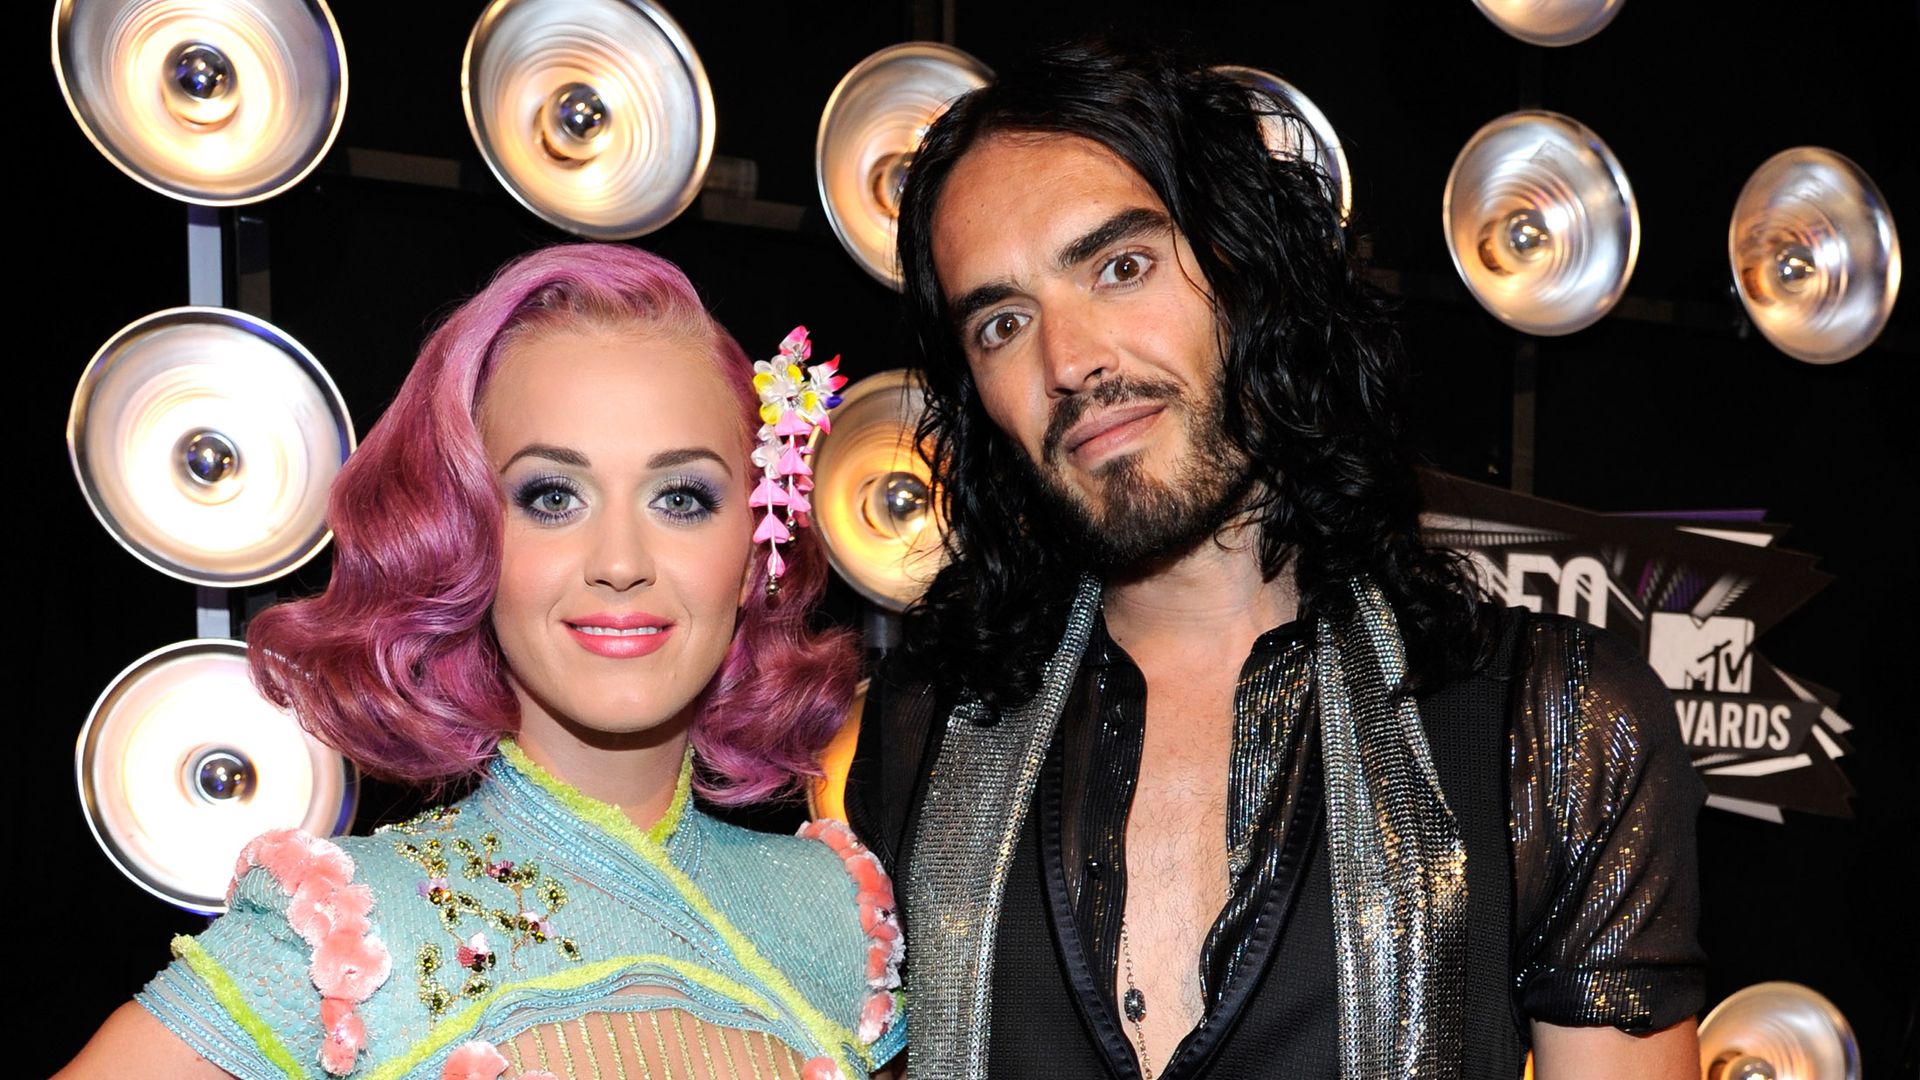 Katy Perry and Russell Brand arrives at the The 28th Annual MTV Video Music Awards at Nokia Theatre L.A. LIVE on August 28, 2011 in Los Angeles, California